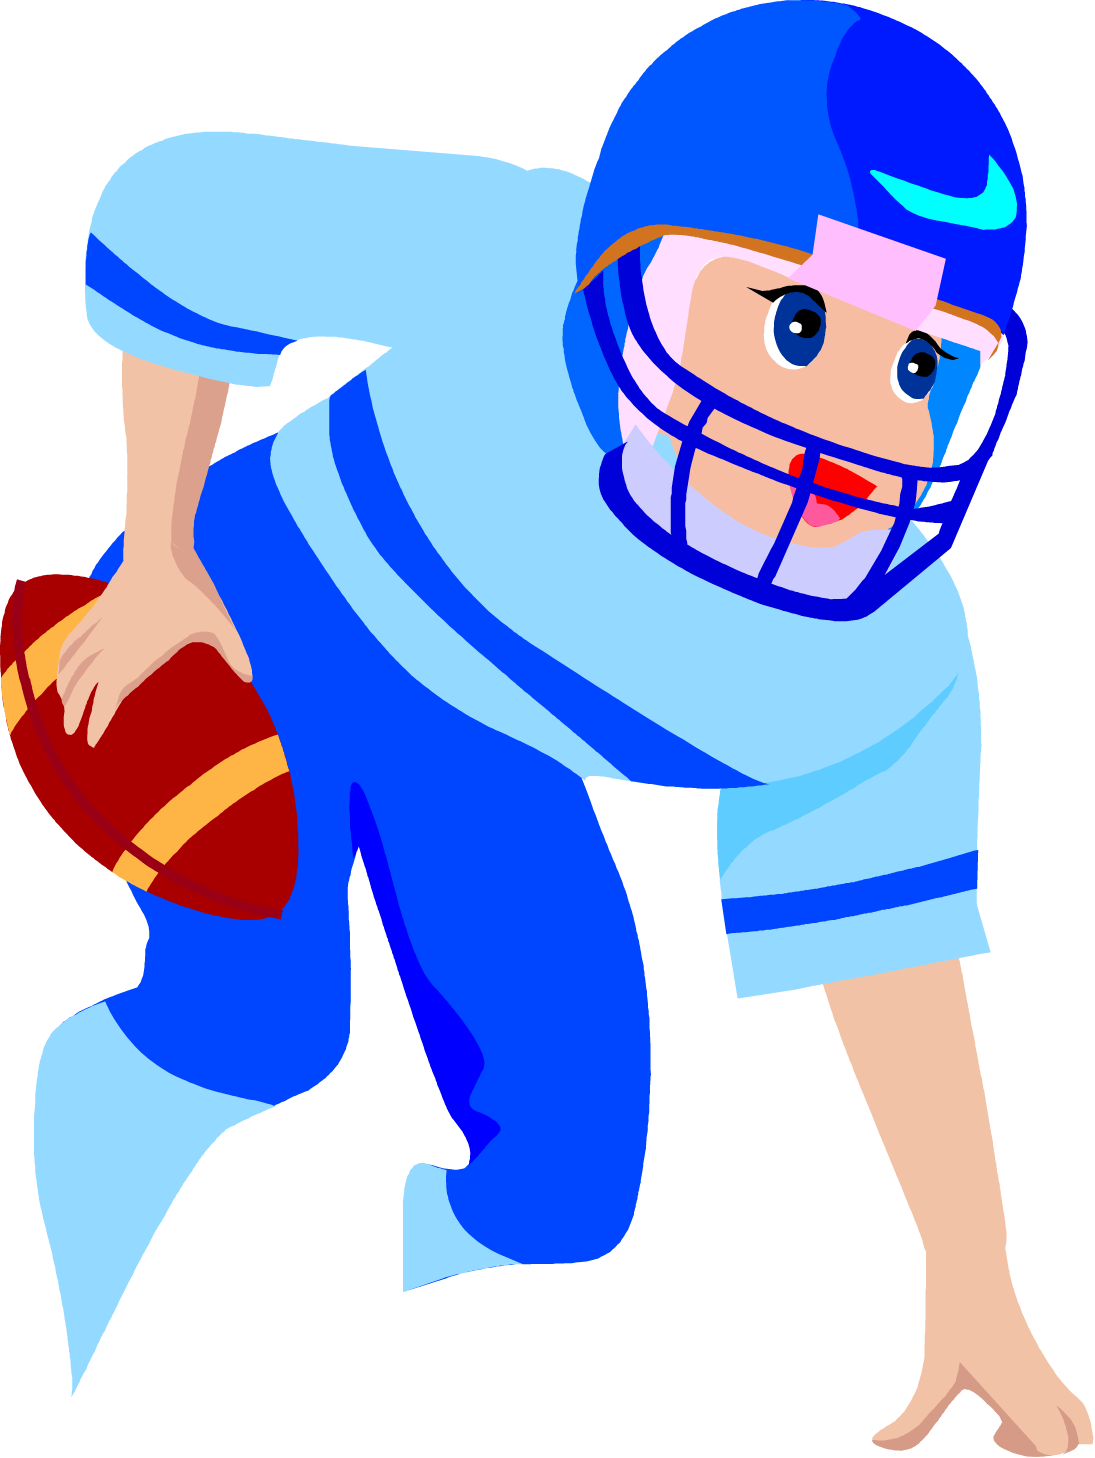 Animated Football Player Action Pose PNG image